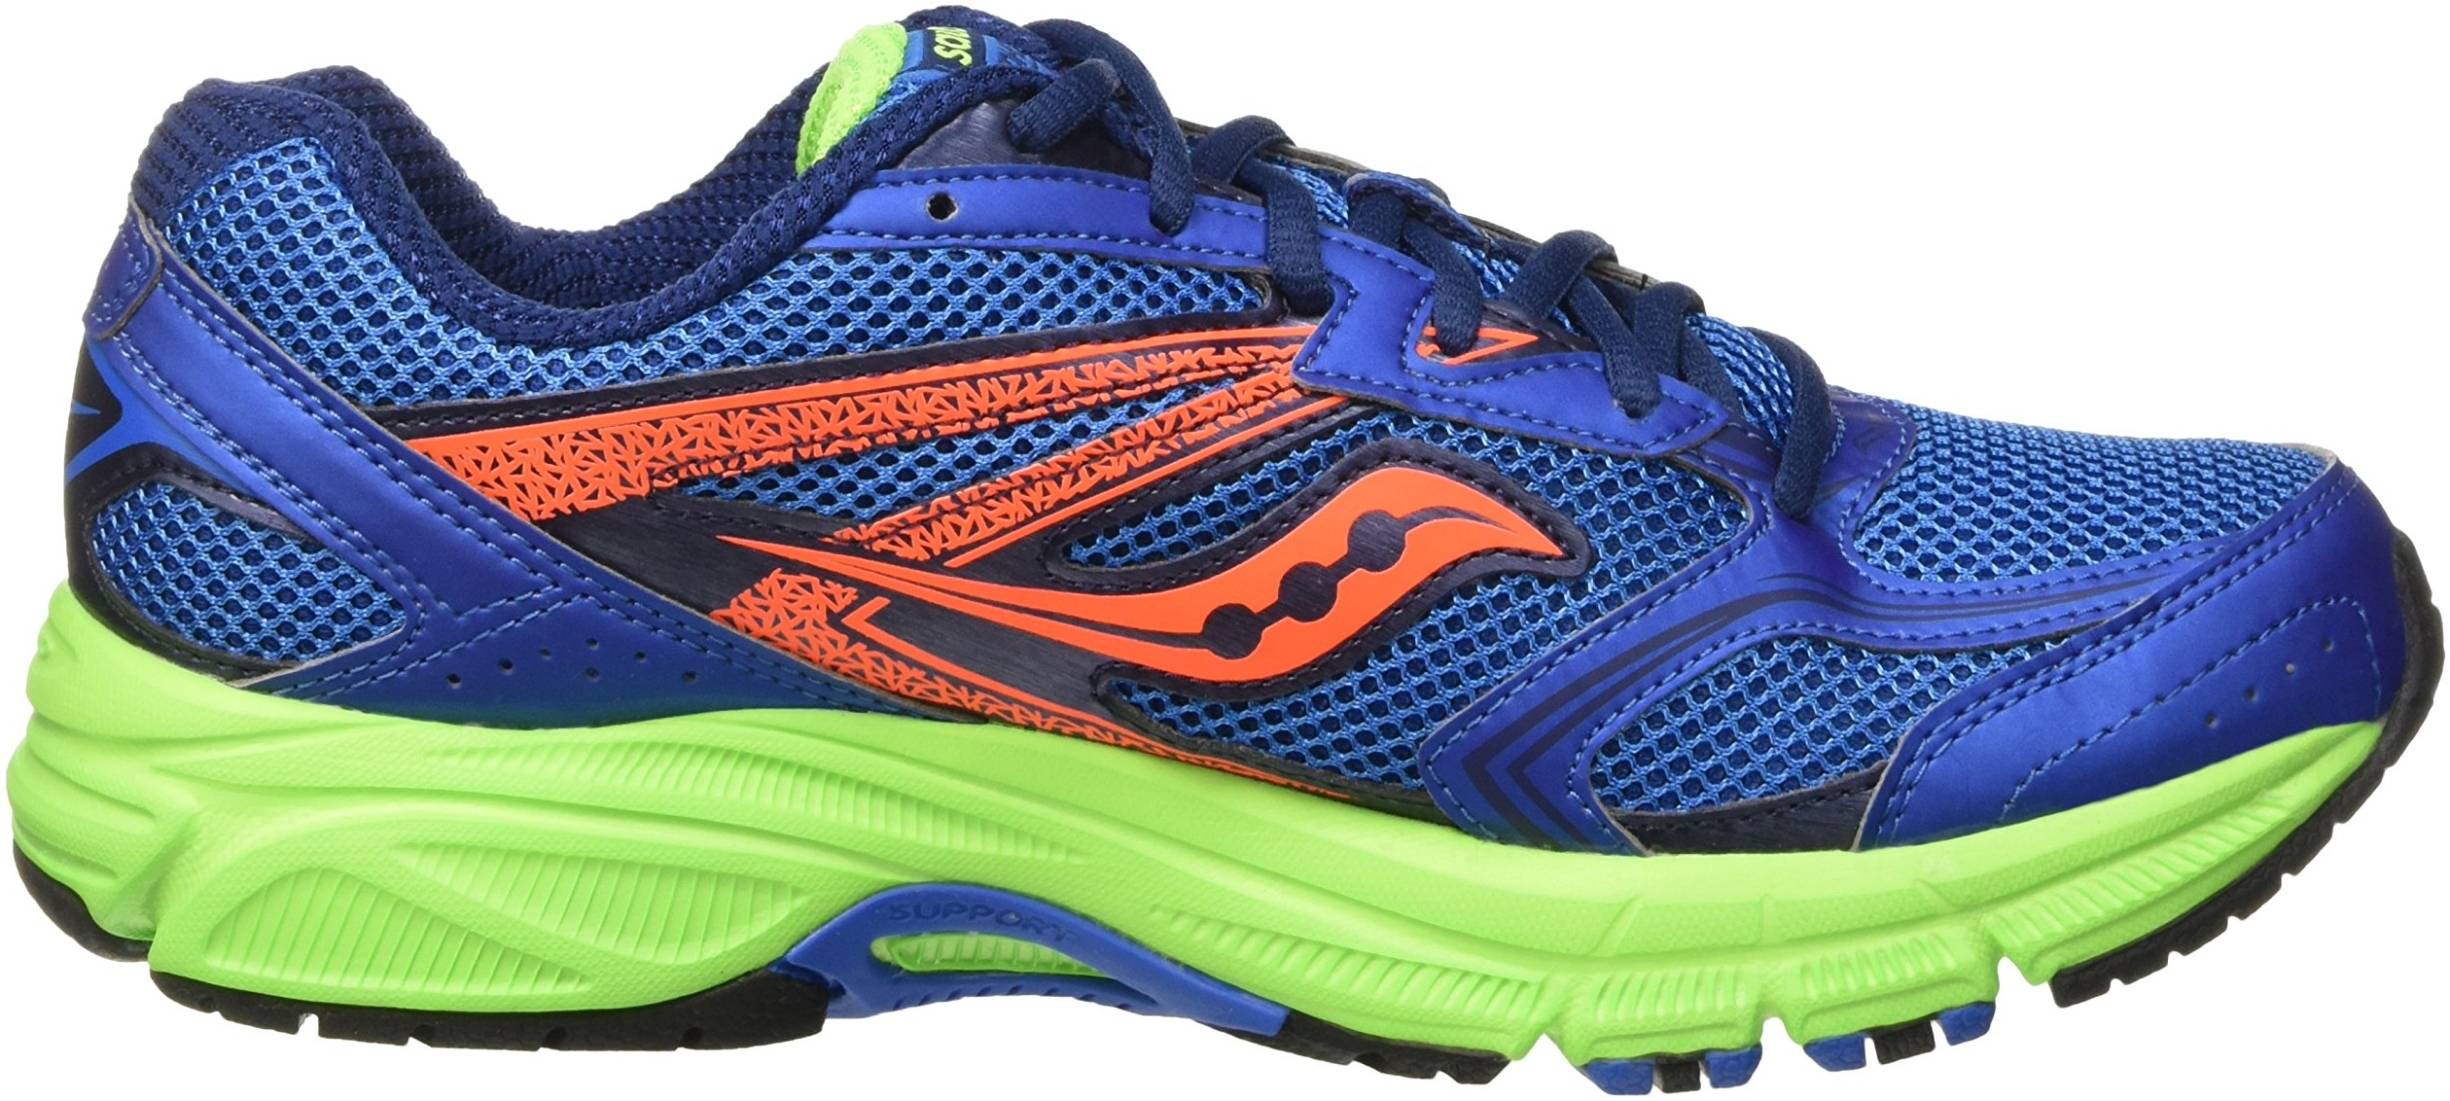 saucony grid cohesion 7 review